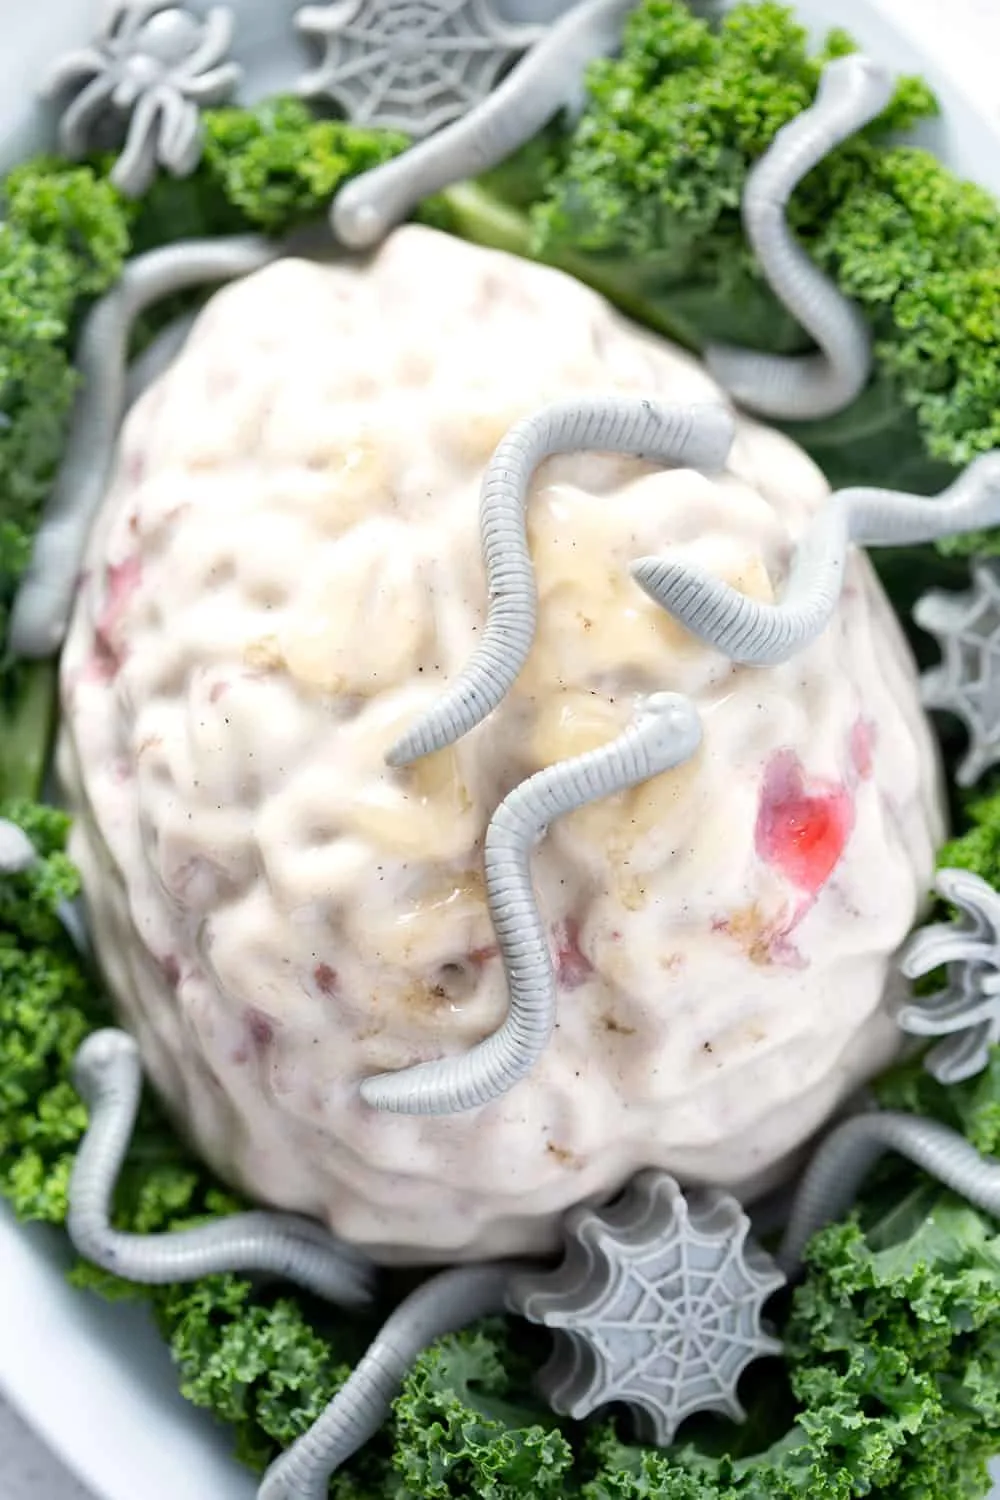 this zombie brain dessert is made with coconut panna cotta and swirls of strawberry jam in a brain mold. It's plated on decorative greens with gray gummy worms and spiders.